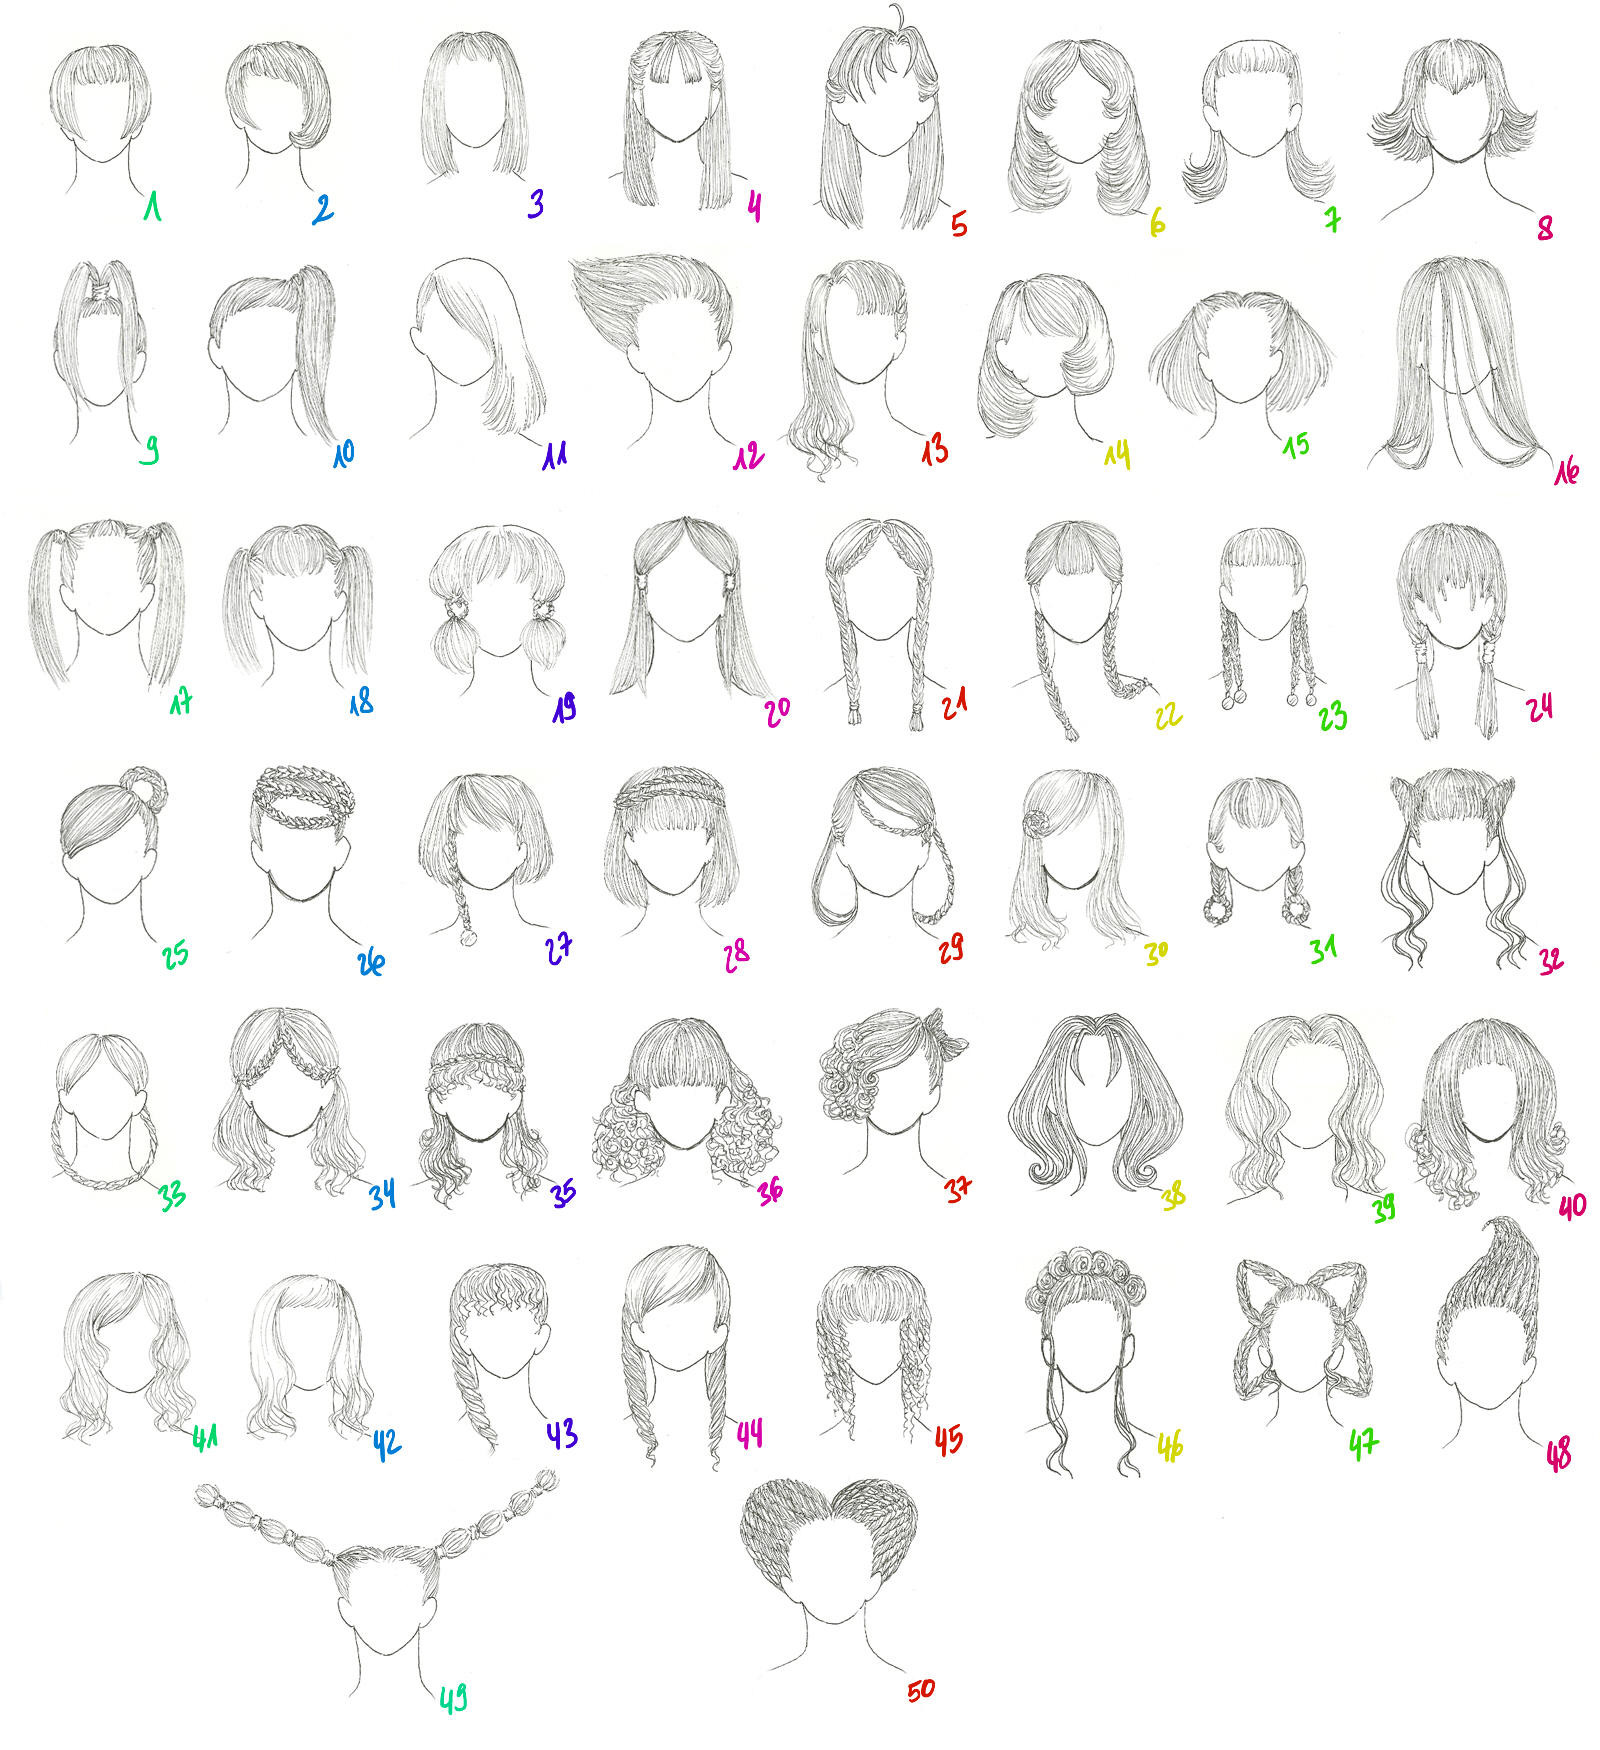 Anime Style Haircuts
 50 Female Anime Hairstyles by AnaisKalinin on DeviantArt